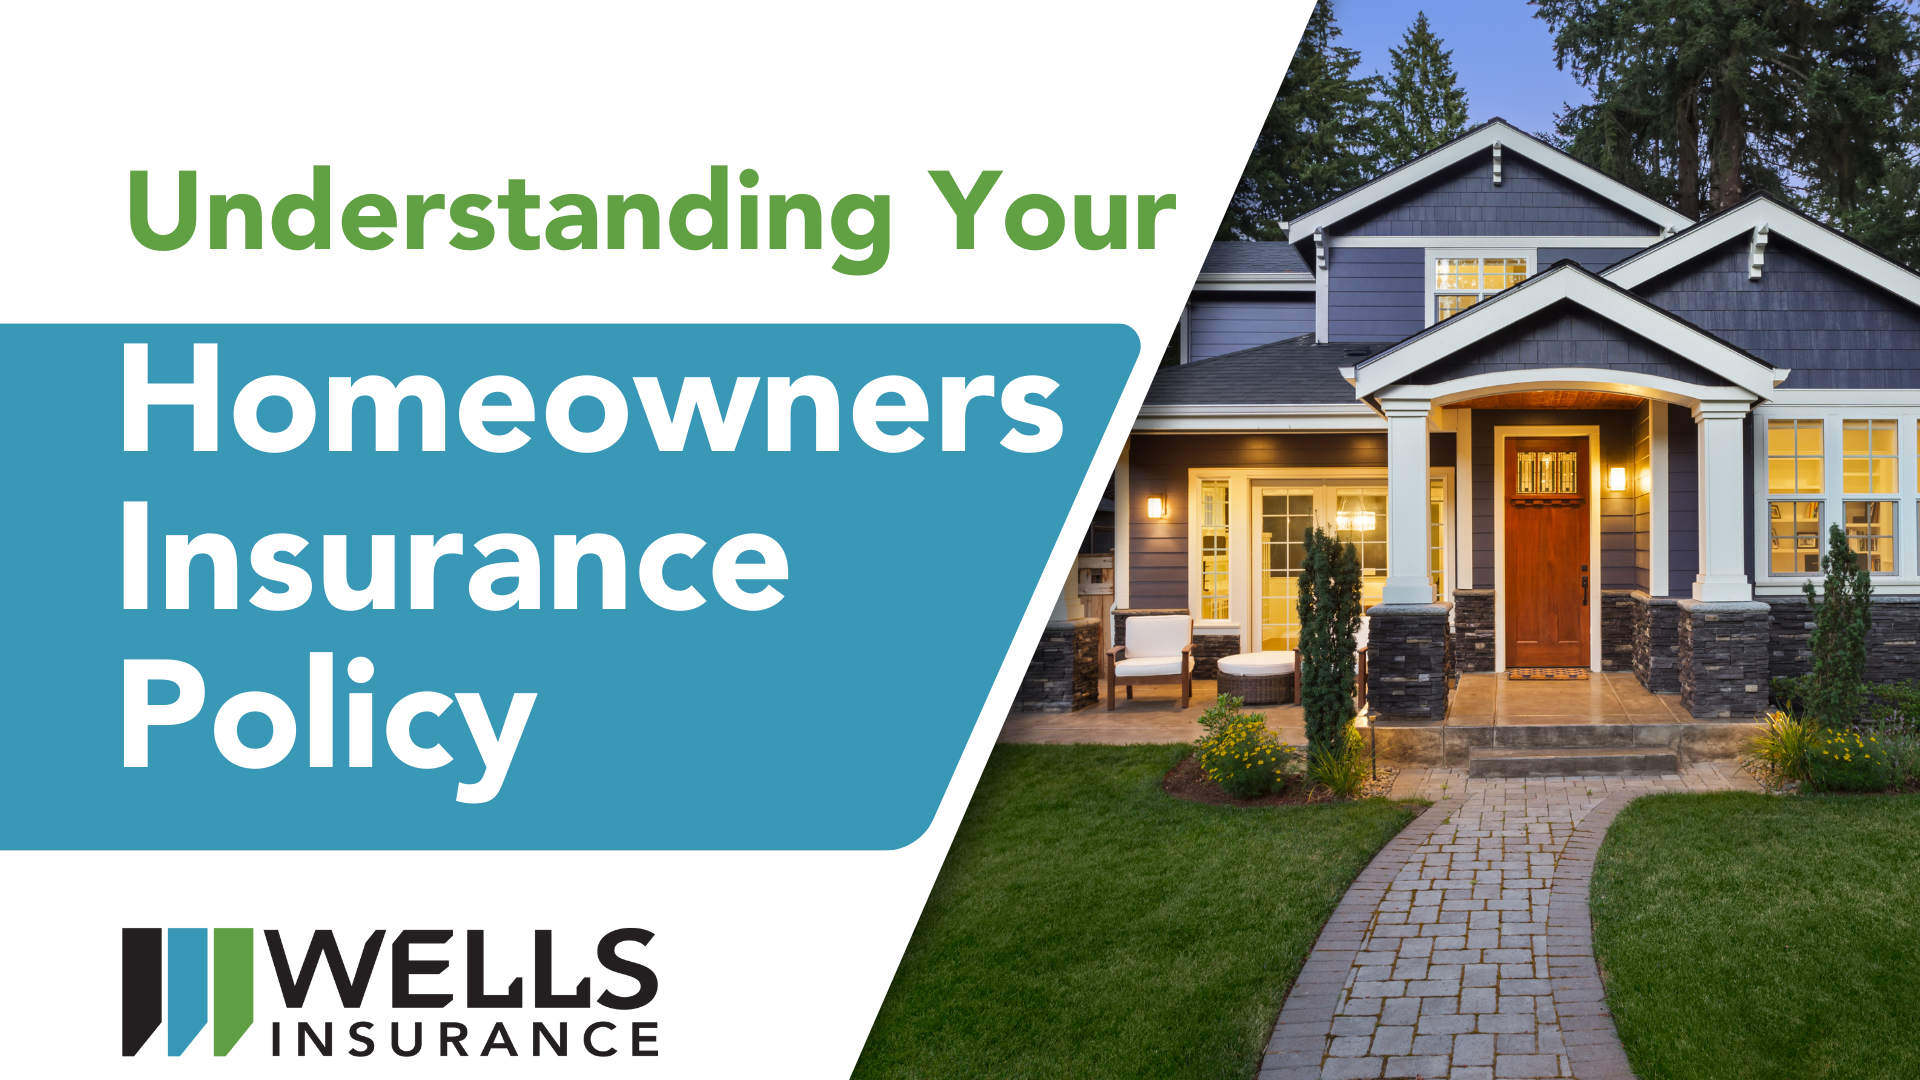 Understanding your homeowners insurance policy